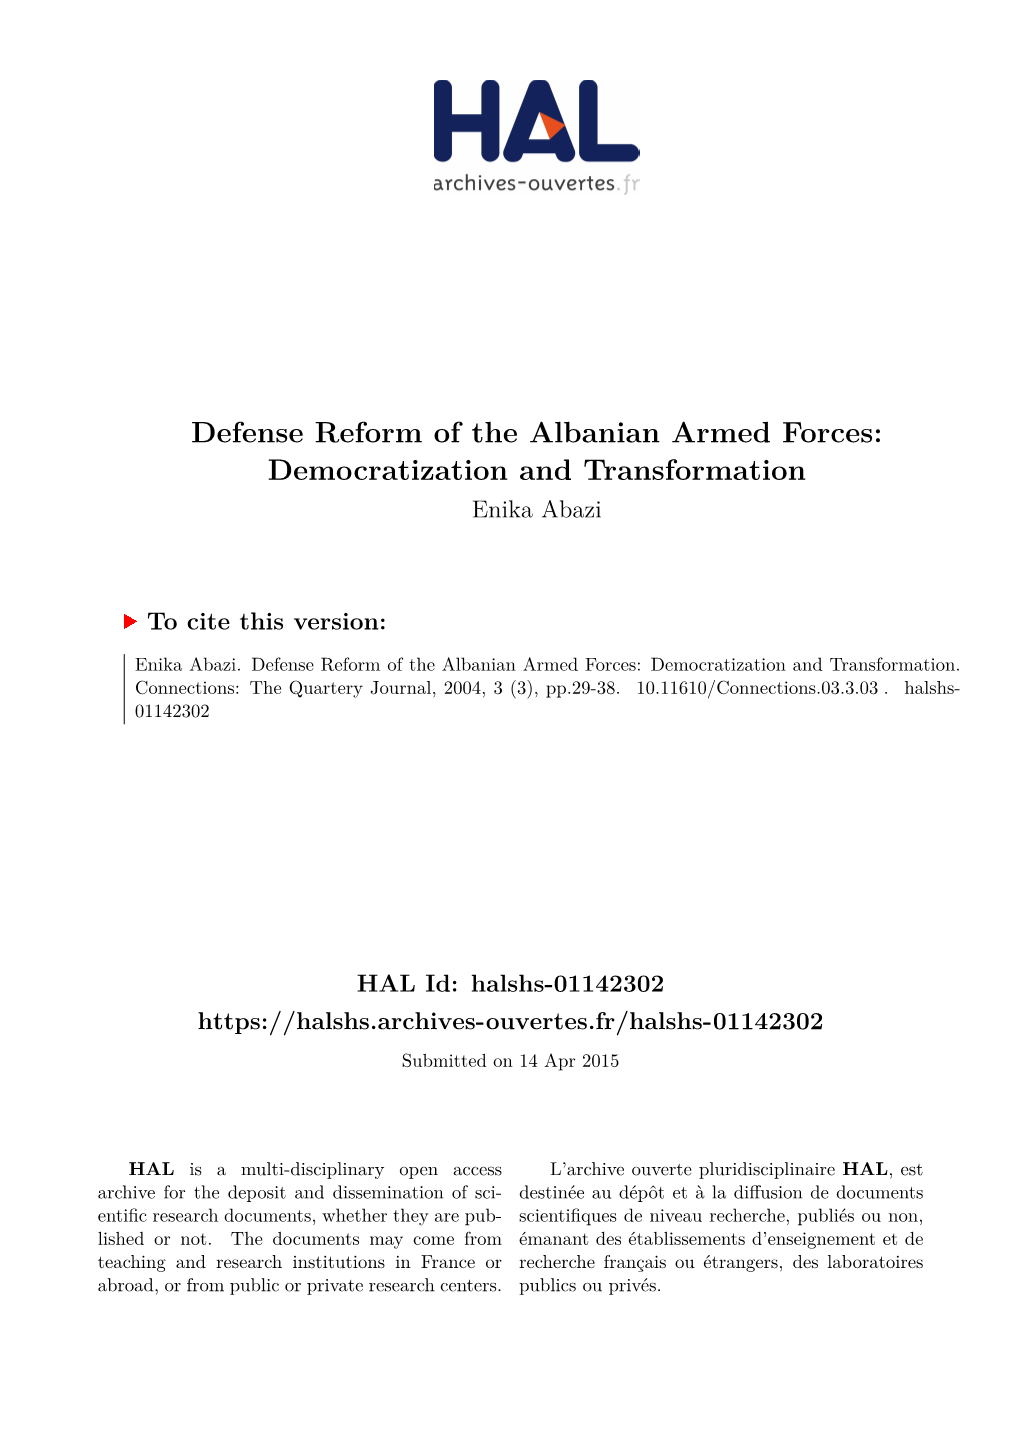 Defense Reform of the Albanian Armed Forces: Democratization and Transformation Enika Abazi